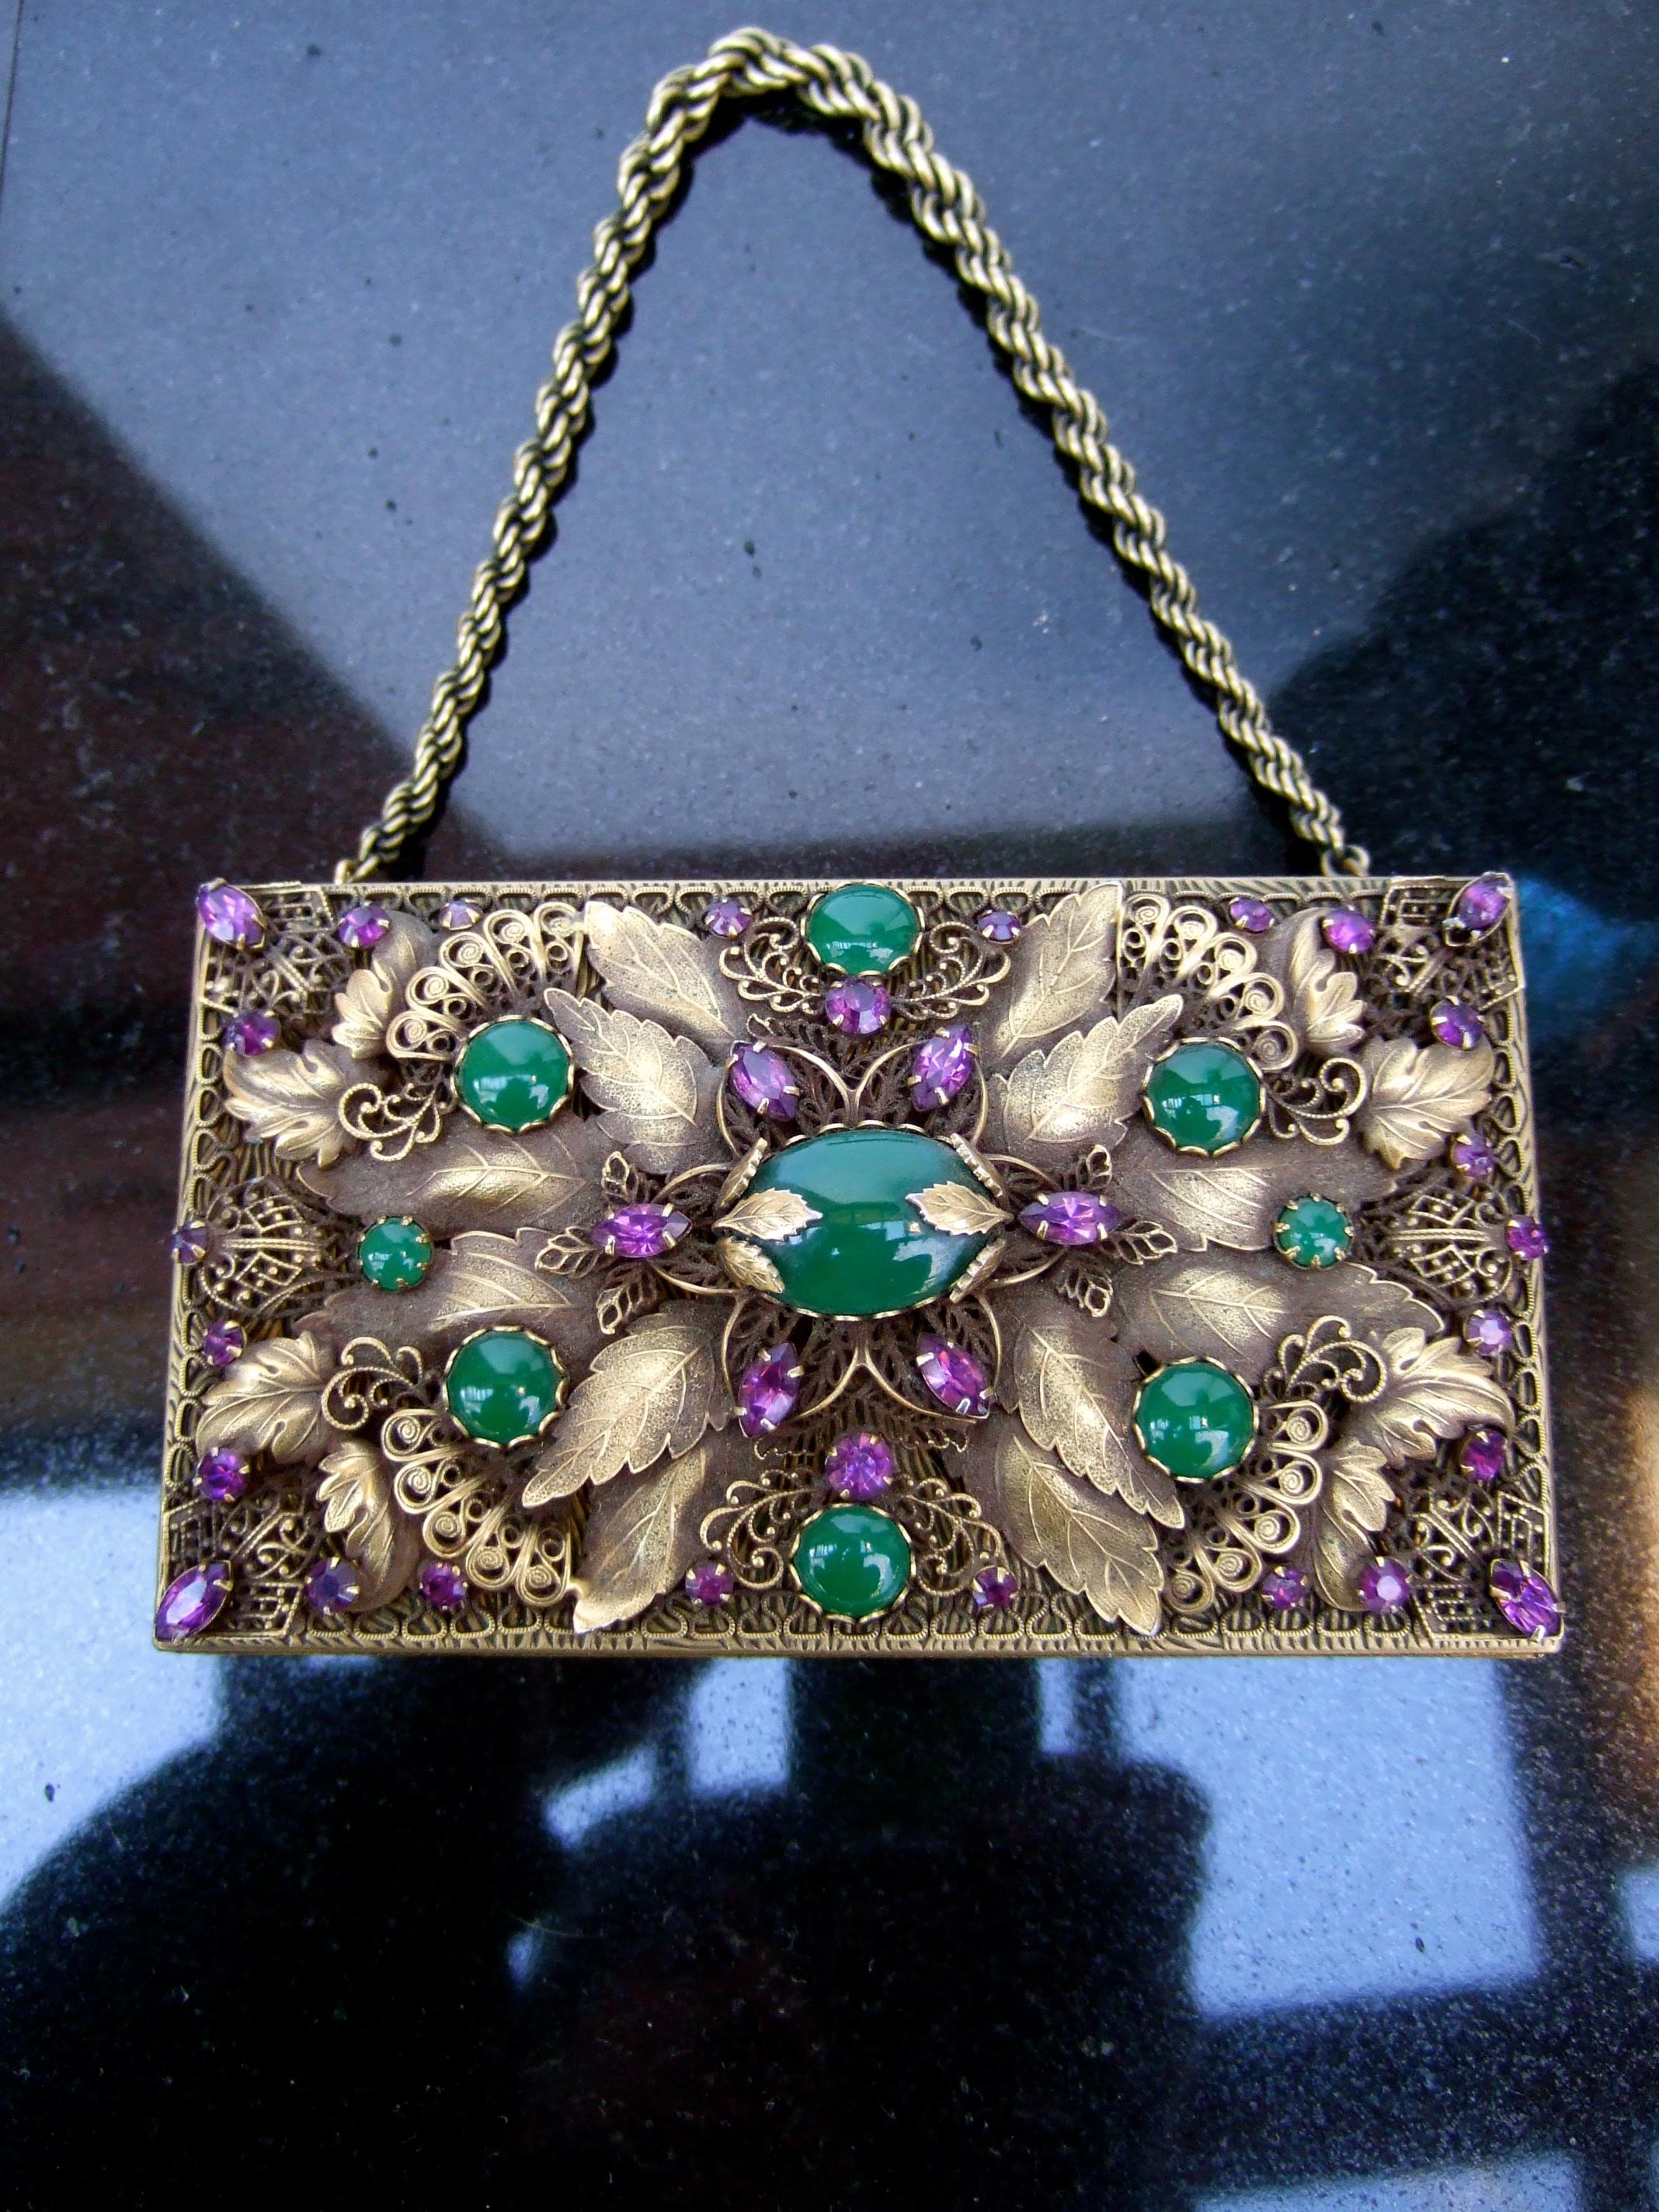 Opulent jeweled brass metal filigree evening bag - compact case designed by Evans c 1950s
The exquisite evening bag is encrusted with smooth green glass chalcedony color glass cabochons
Accented with clusters of amethyst color prong set crystals.